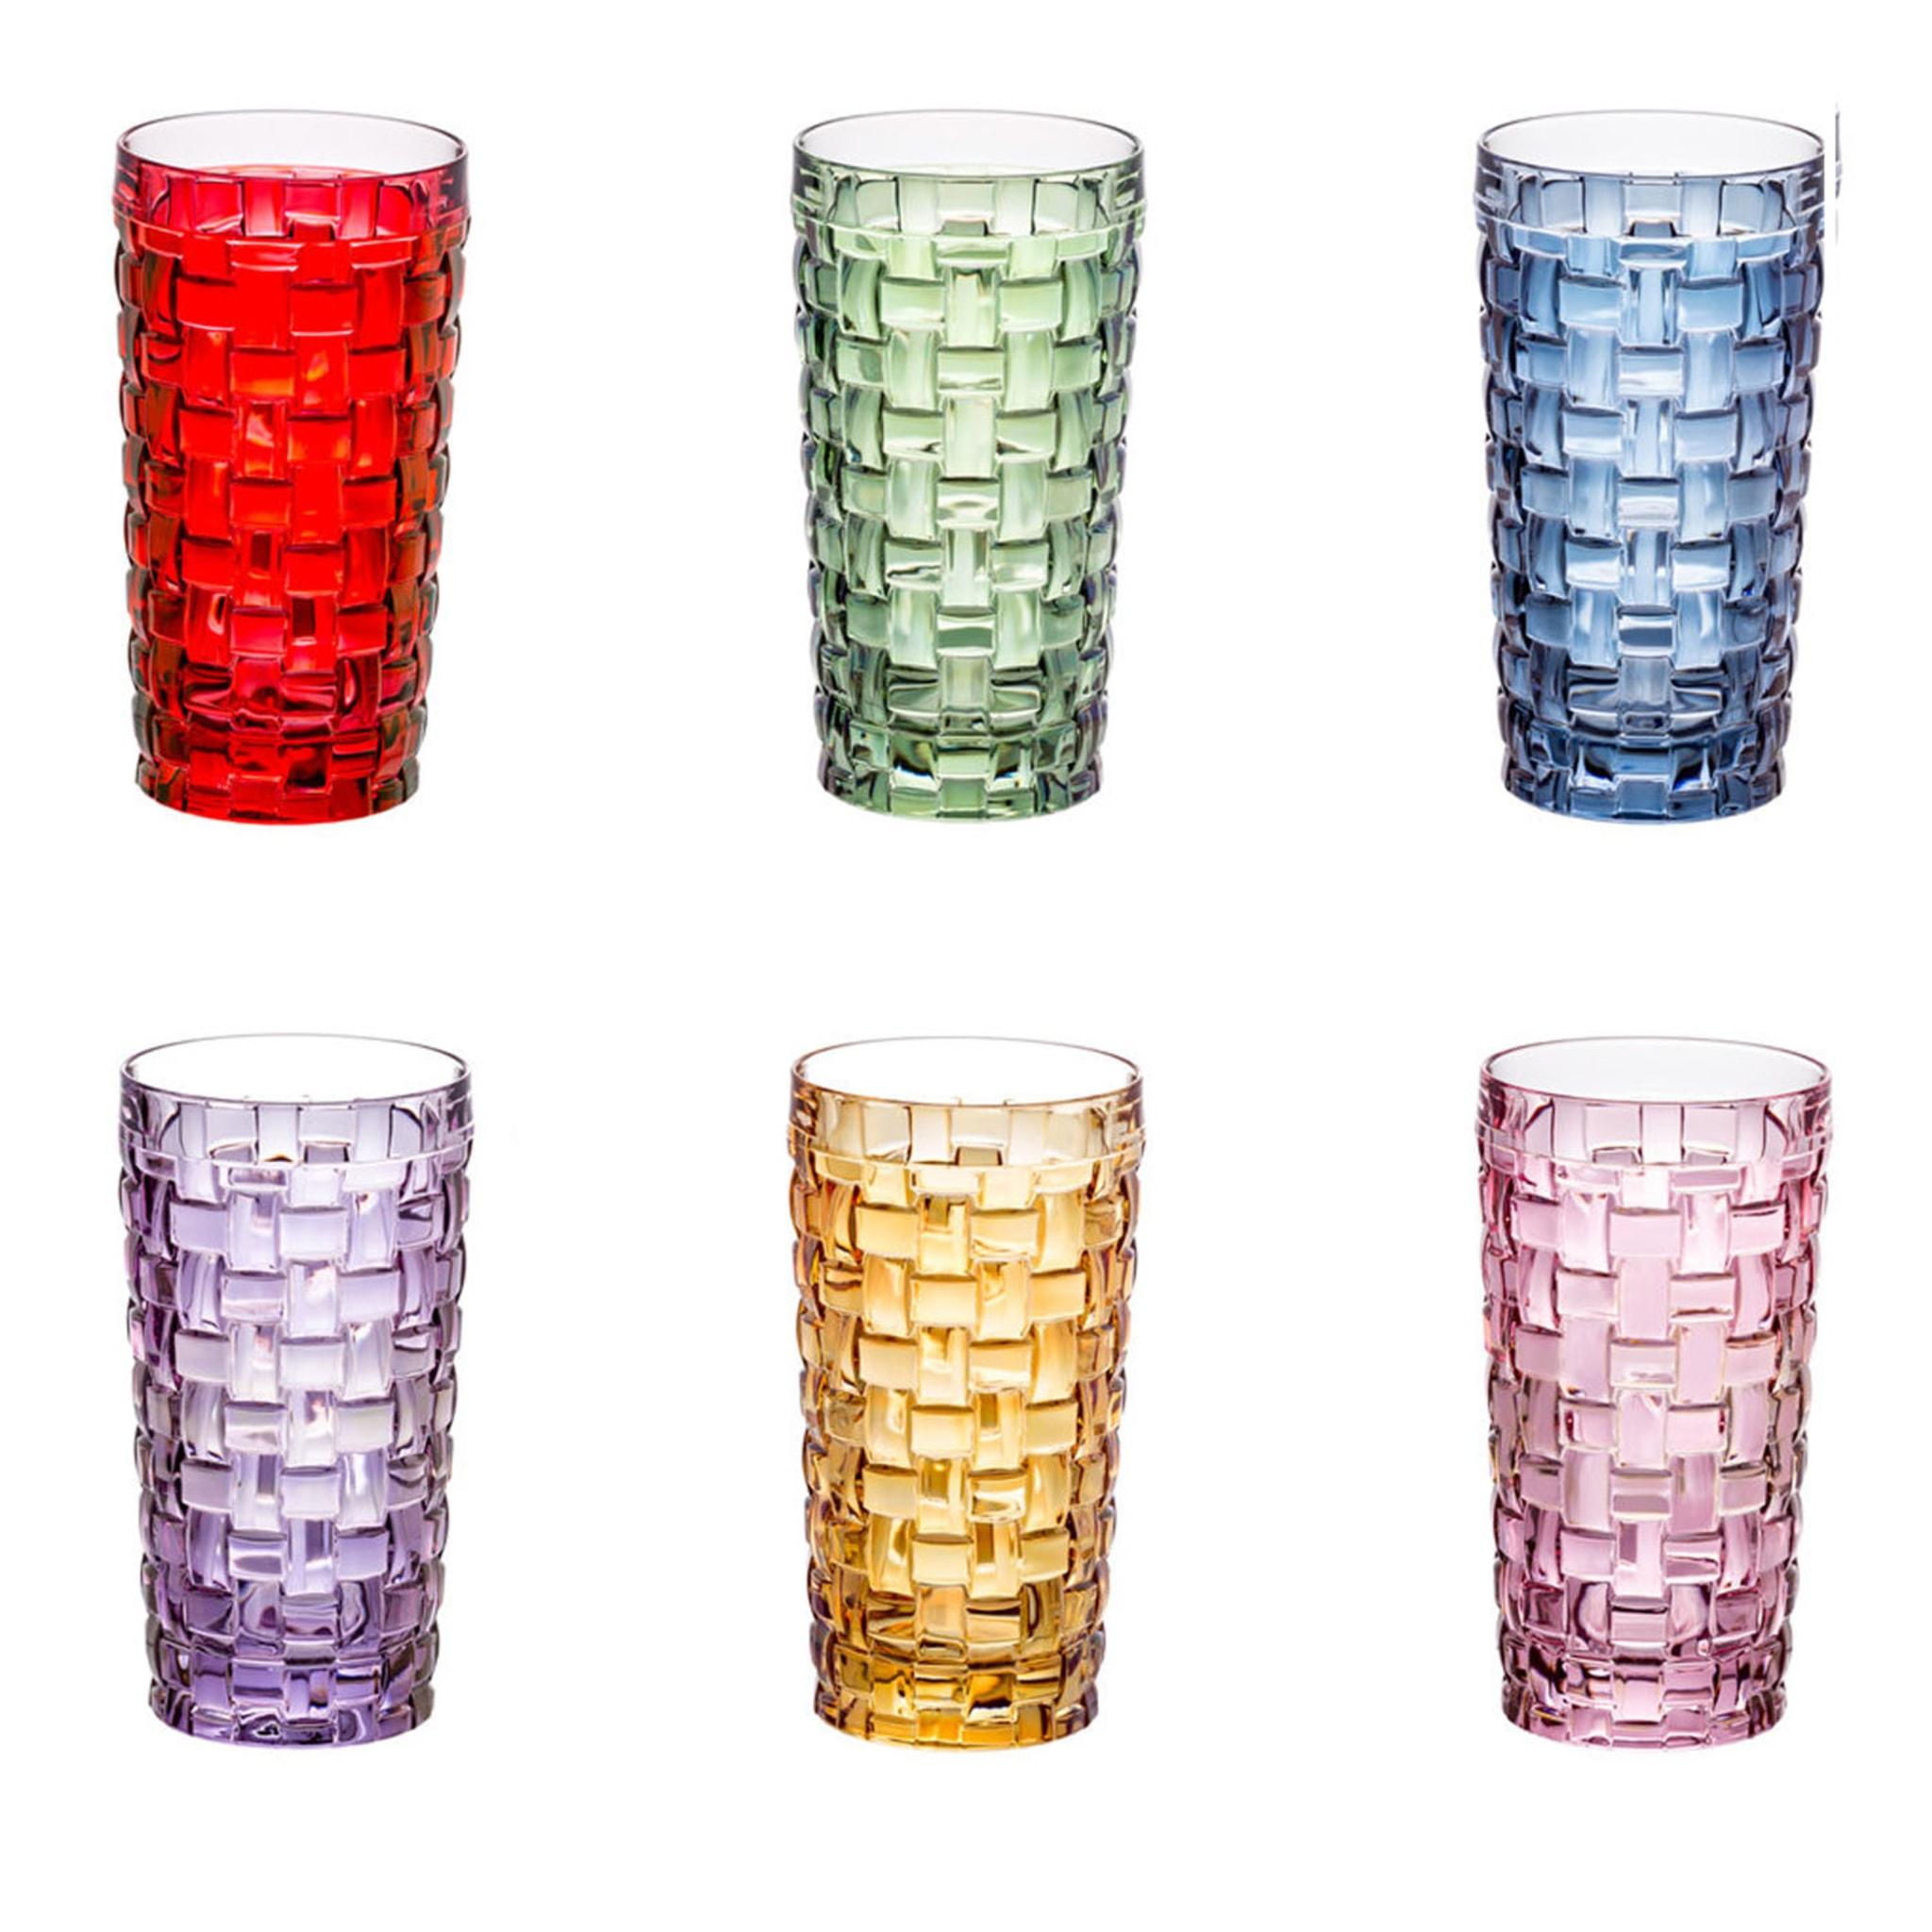 Colorful and eye-catching, this set is part of the Manhattan Collection. Each glass is hand decorated and boasts a superb geometric texture resulting from the juxtaposition of a myriad of rectangles that create striking effects when reflecting the